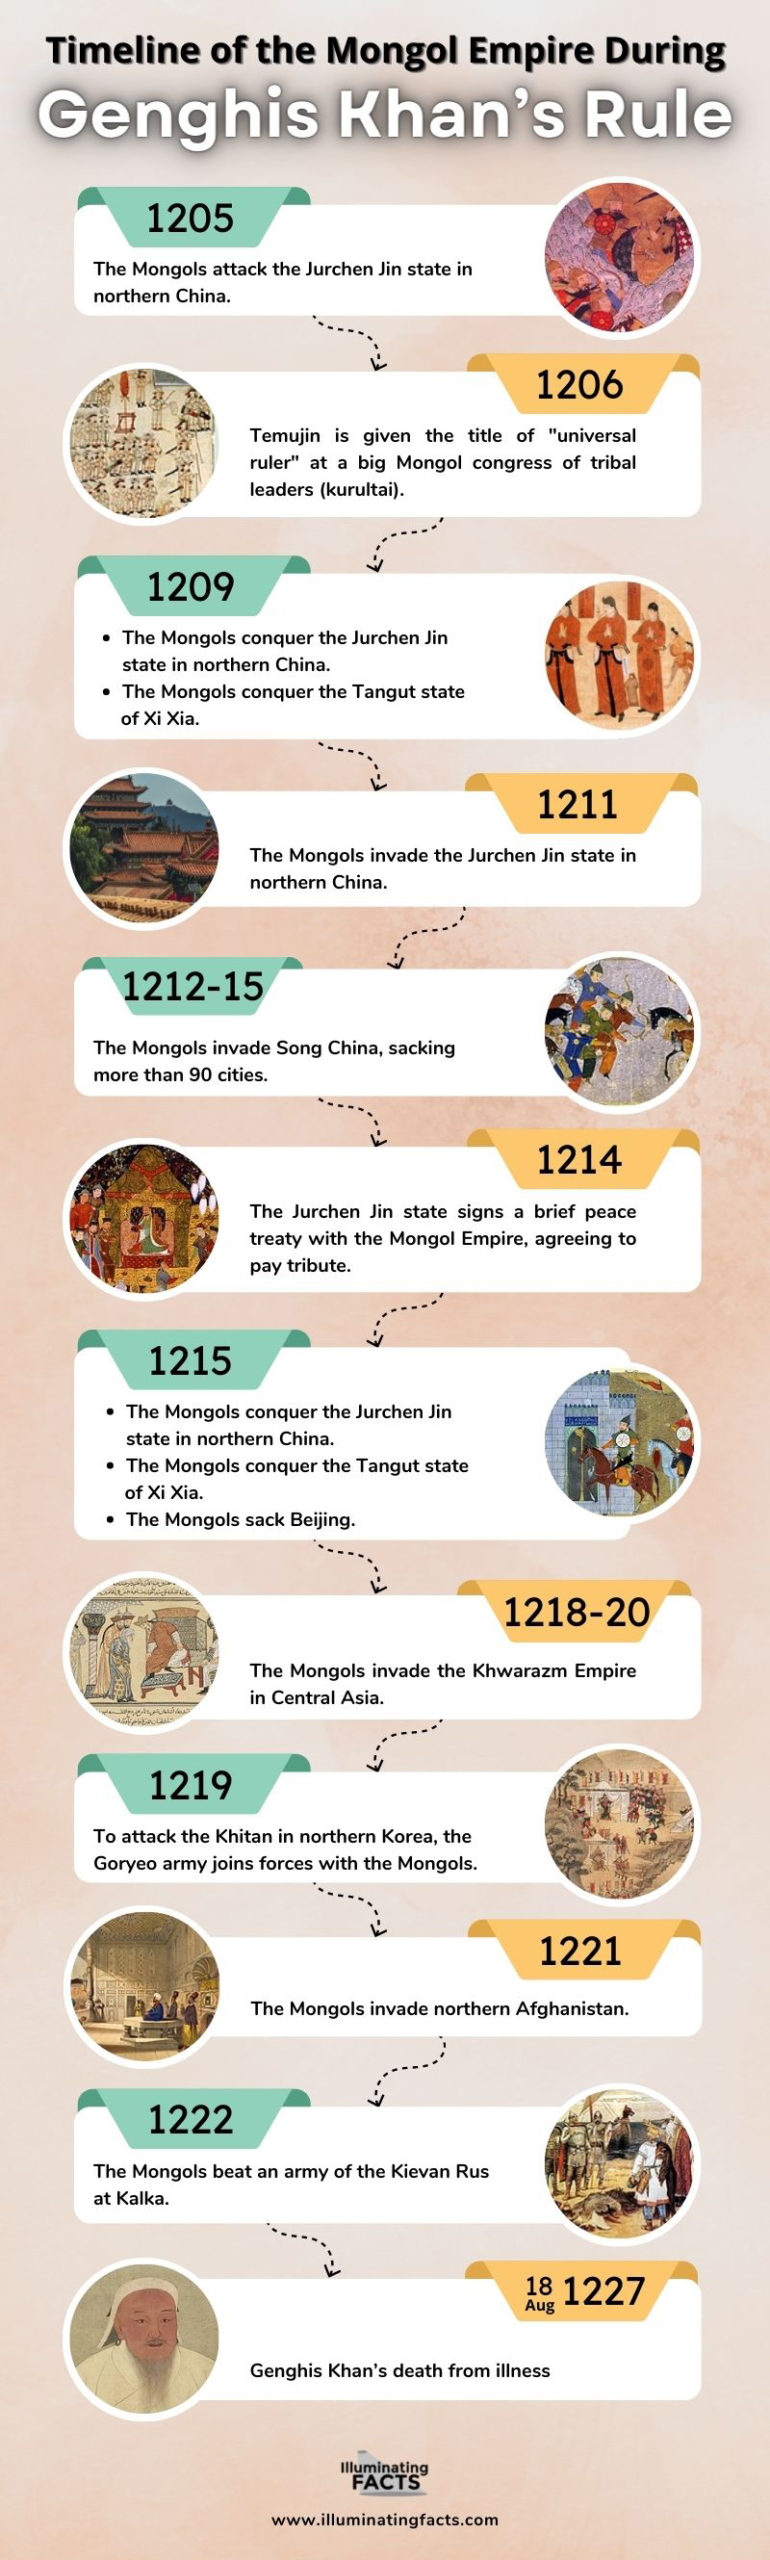 Timeline of the Mongol Empire During Genghis Khans Rule